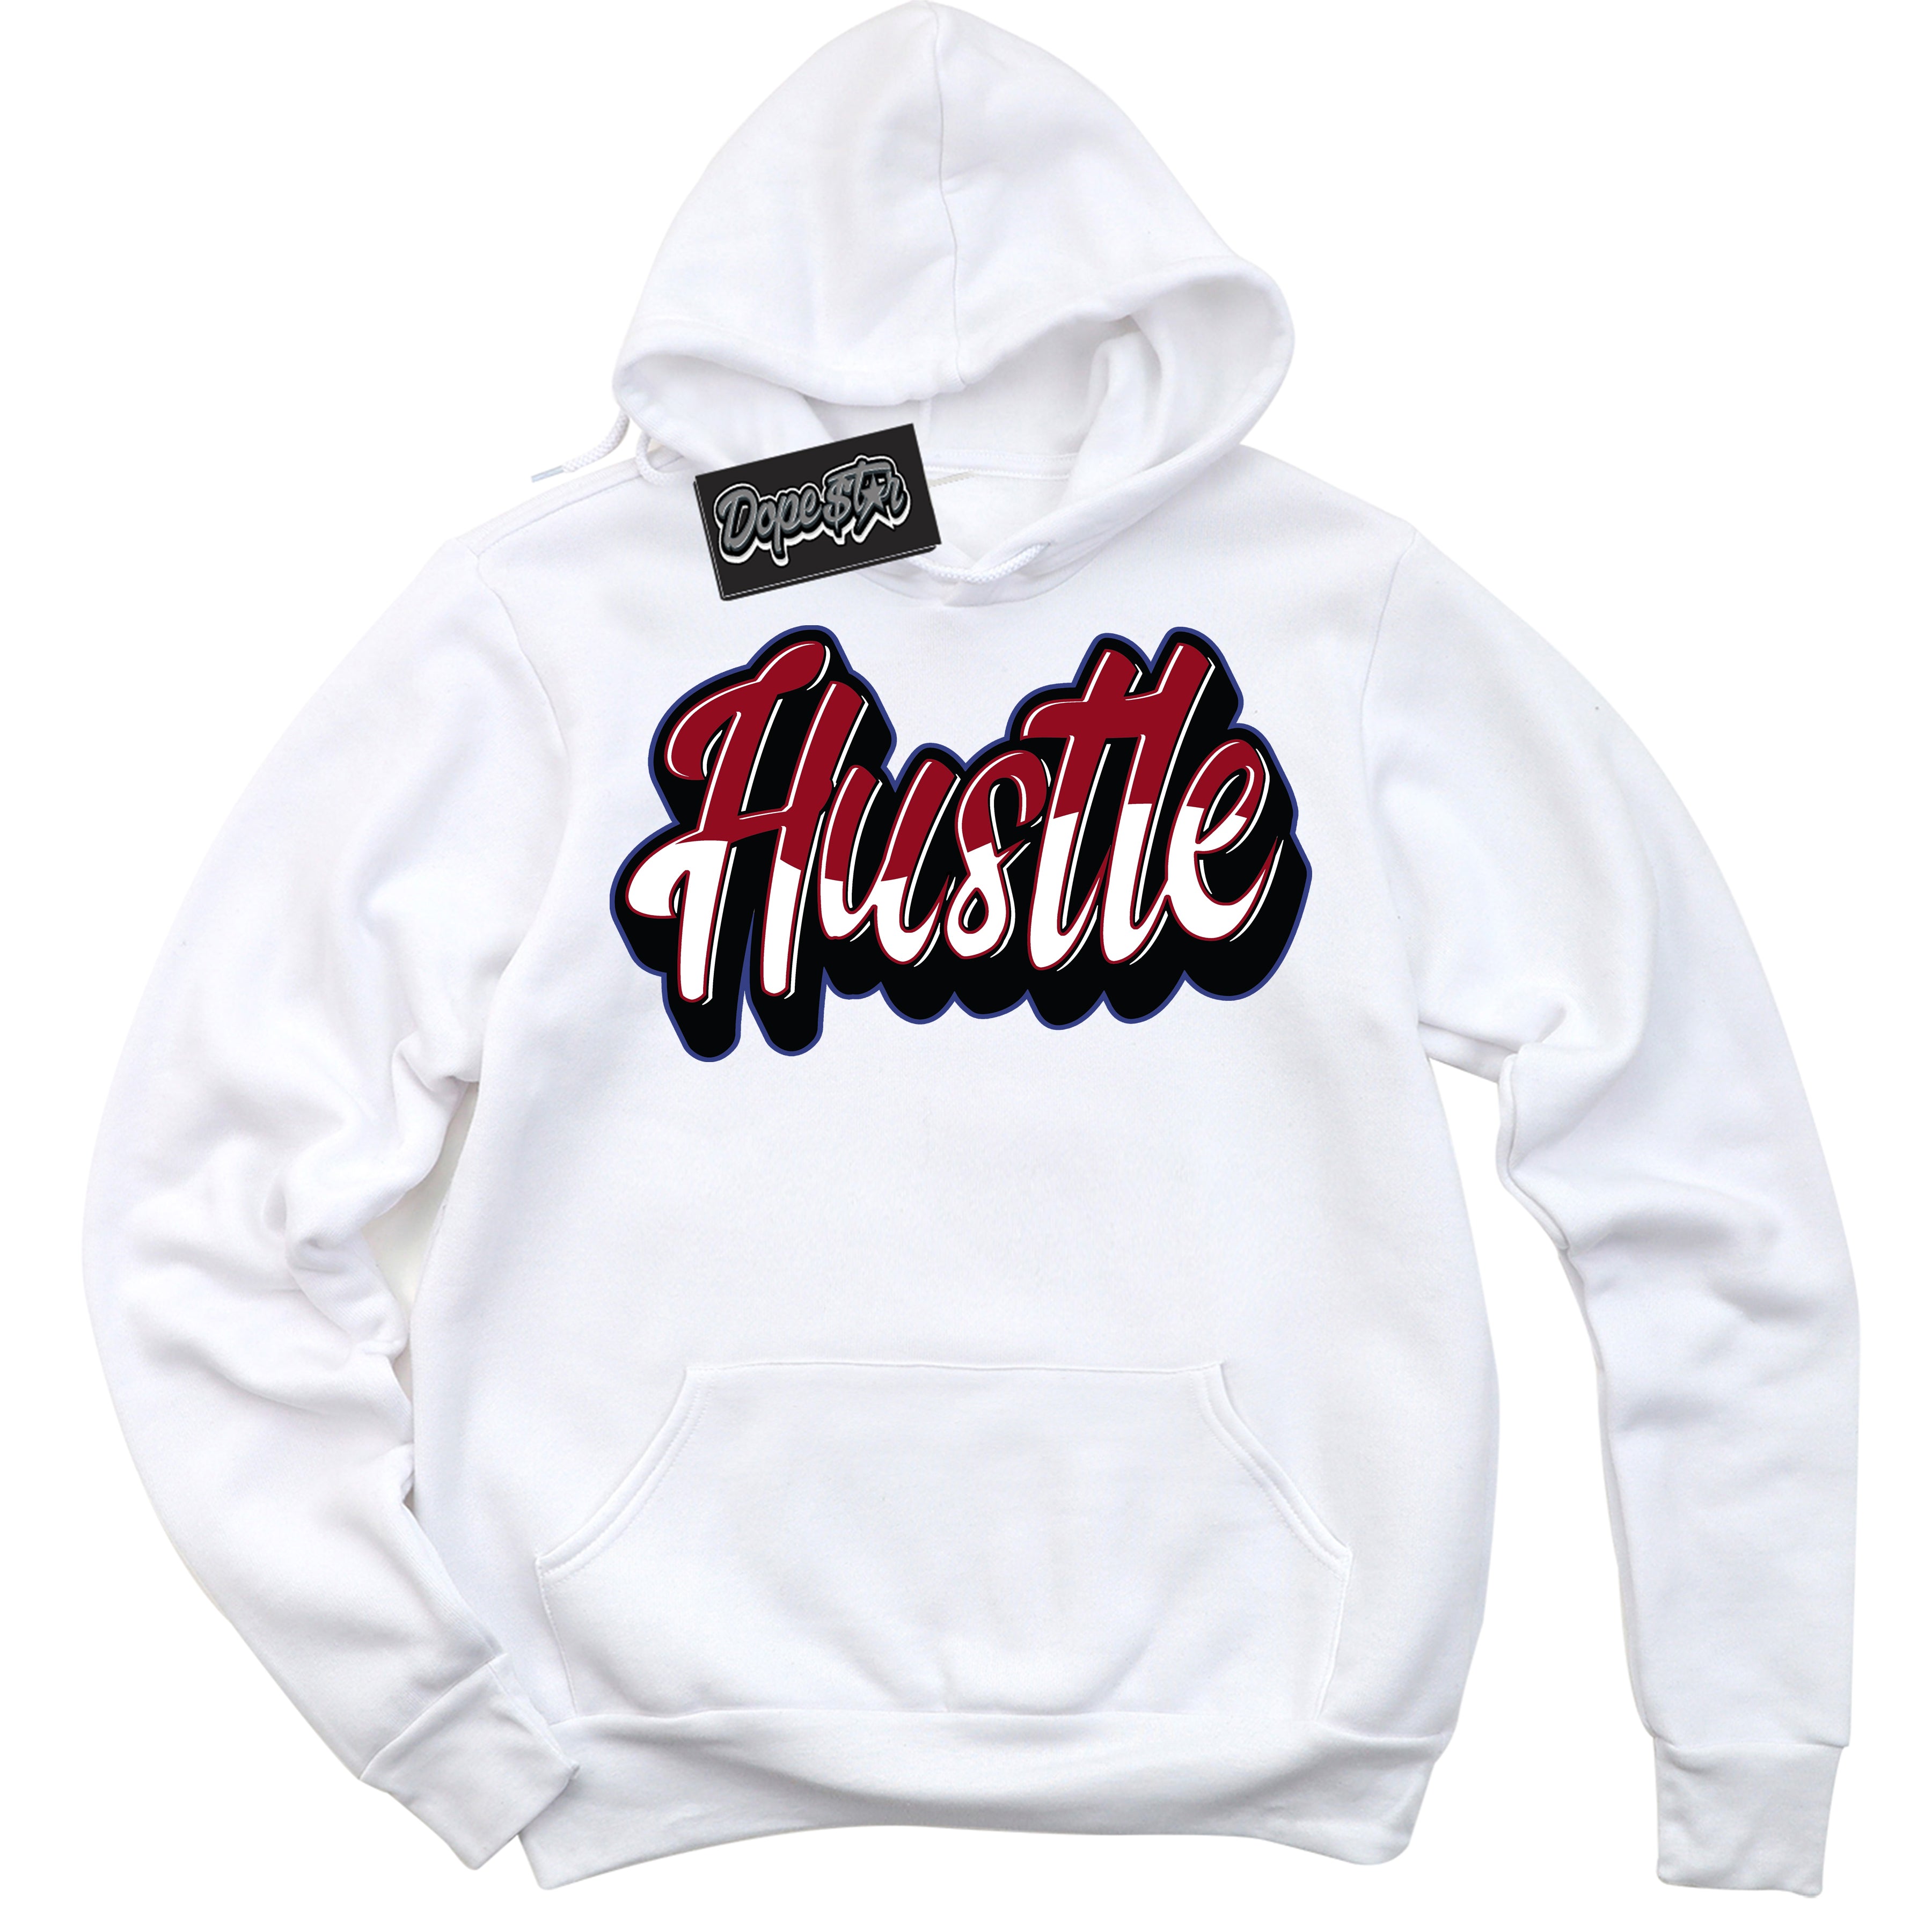 Cool White Hoodie with “ Hustle ”  design that Perfectly Matches Playoffs 8s Sneakers.